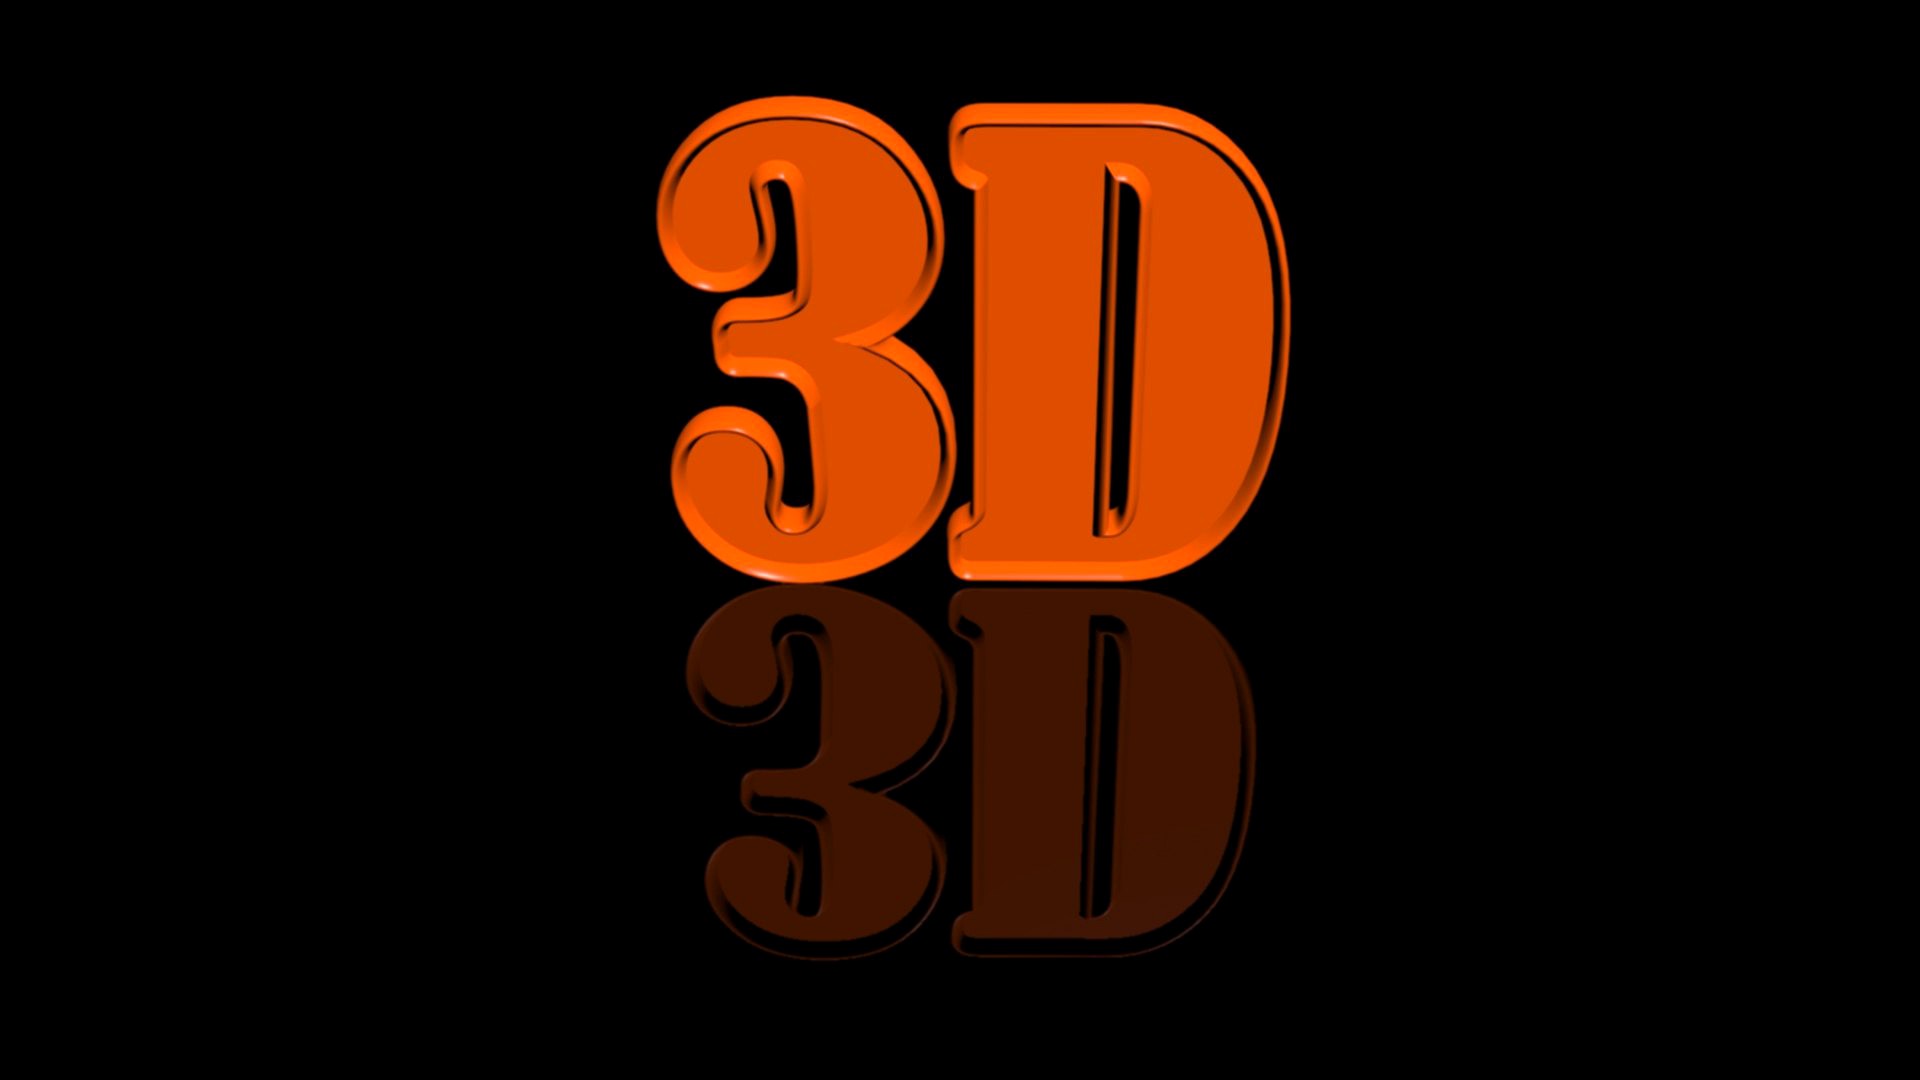 3D Text with Bevel Modifier